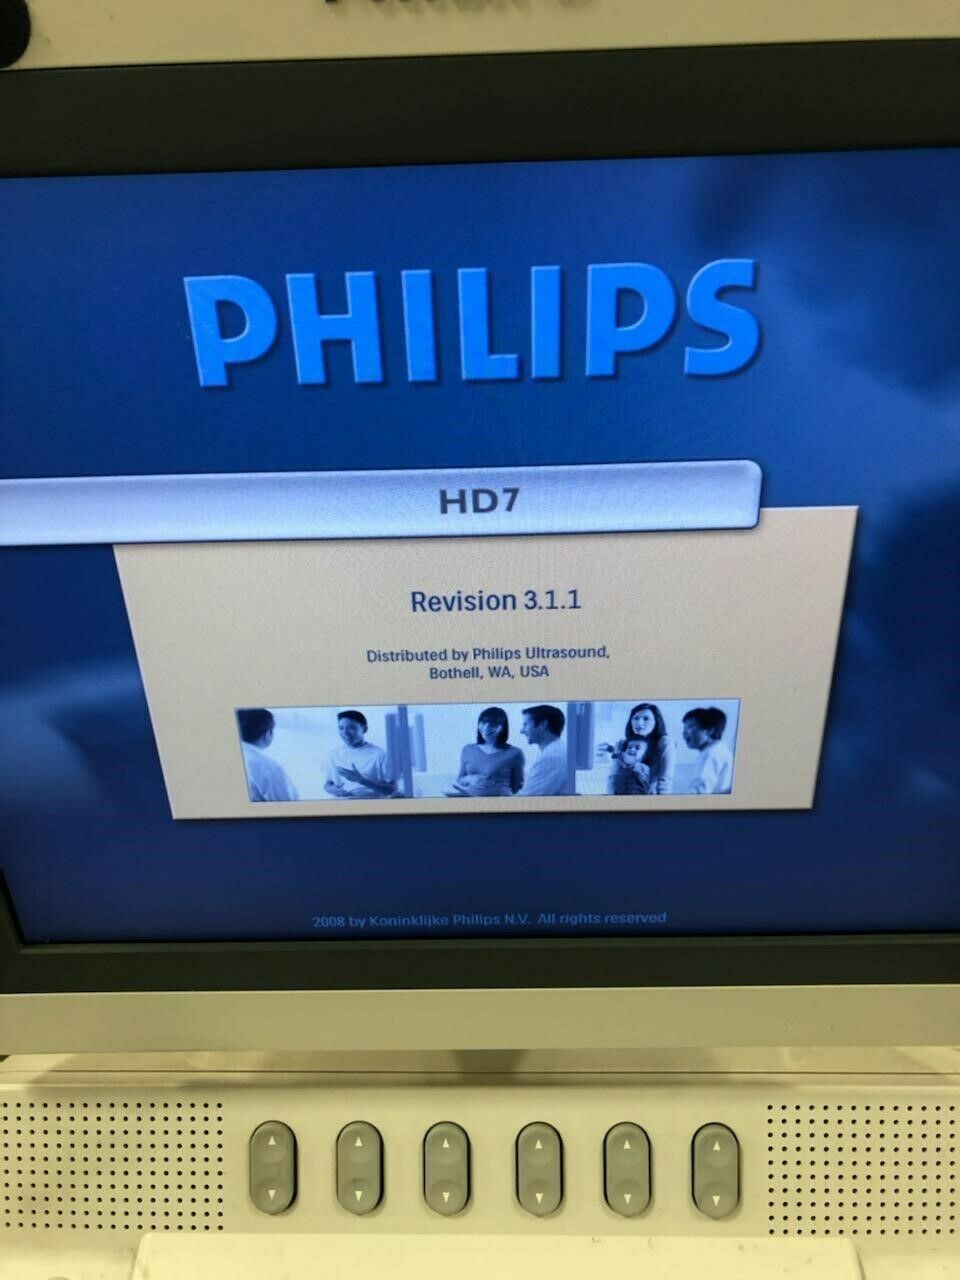 Philips HD7 Ultrasound - Refurbished DIAGNOSTIC ULTRASOUND MACHINES FOR SALE